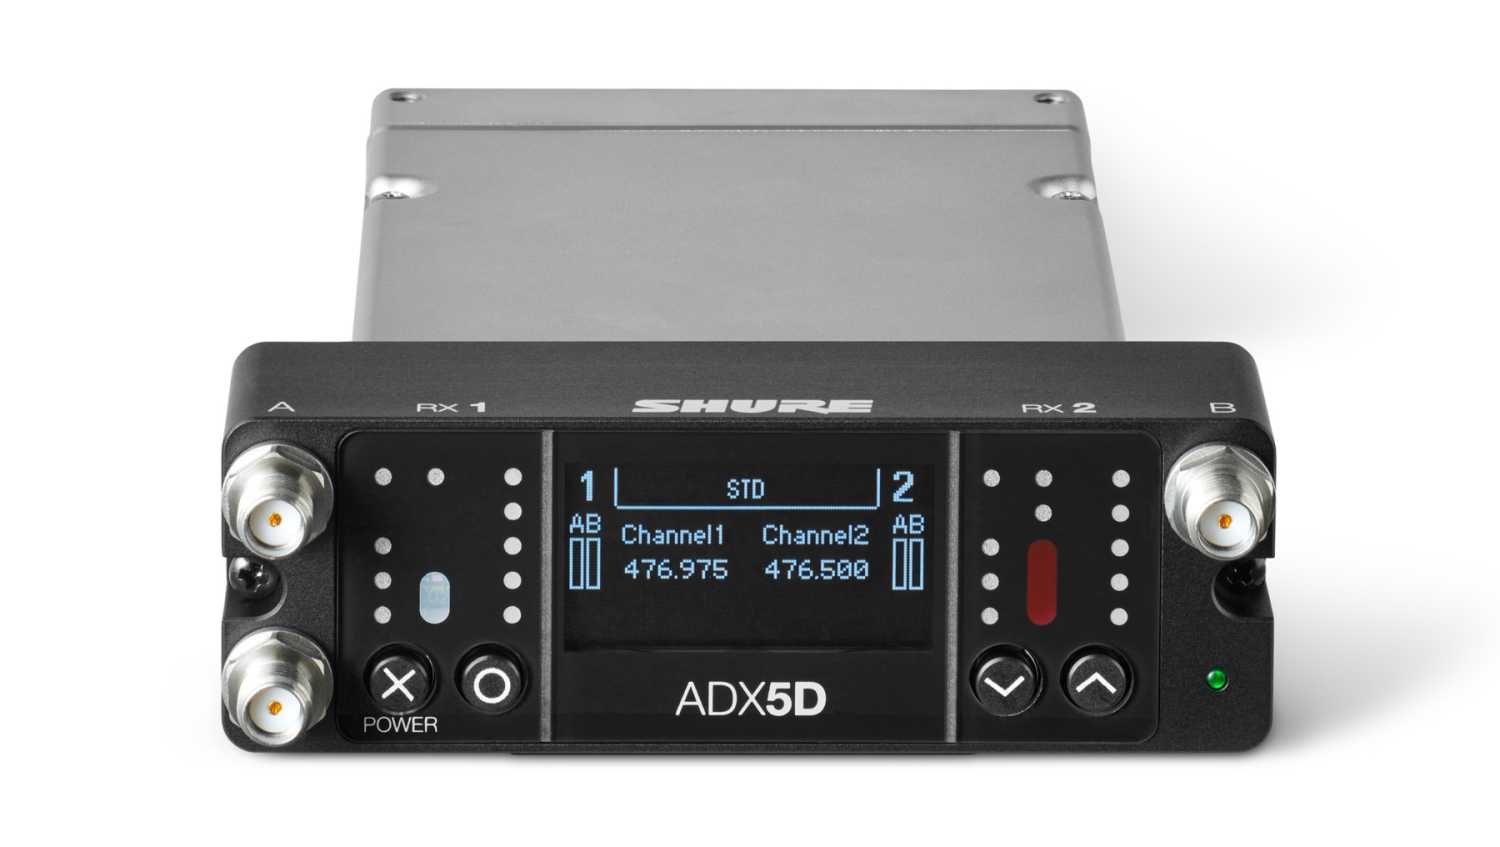 The new third-party integration lets sound mixers control the ADX5D from their mix position